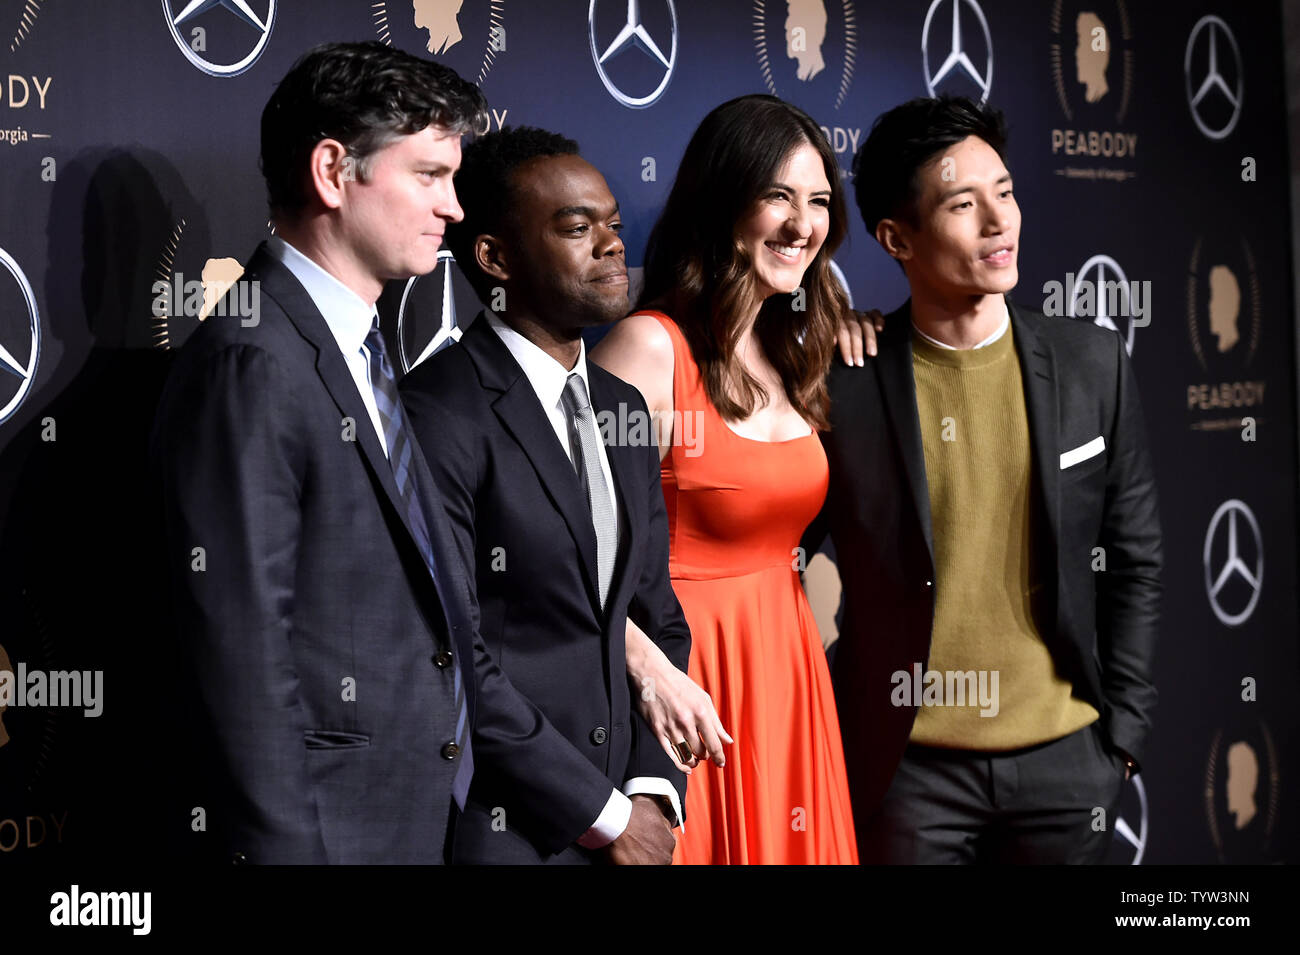 Michael Schur, D'Arcy Carden, Manny Jacinto and William Jackson Harper arrive in the press room with an award at the 78th Annual Peabody Awards Ceremony at Cipriani, Wall Street on May 18, 2019 in New York City.     Photo by Steven Ferdman/UPI Stock Photo